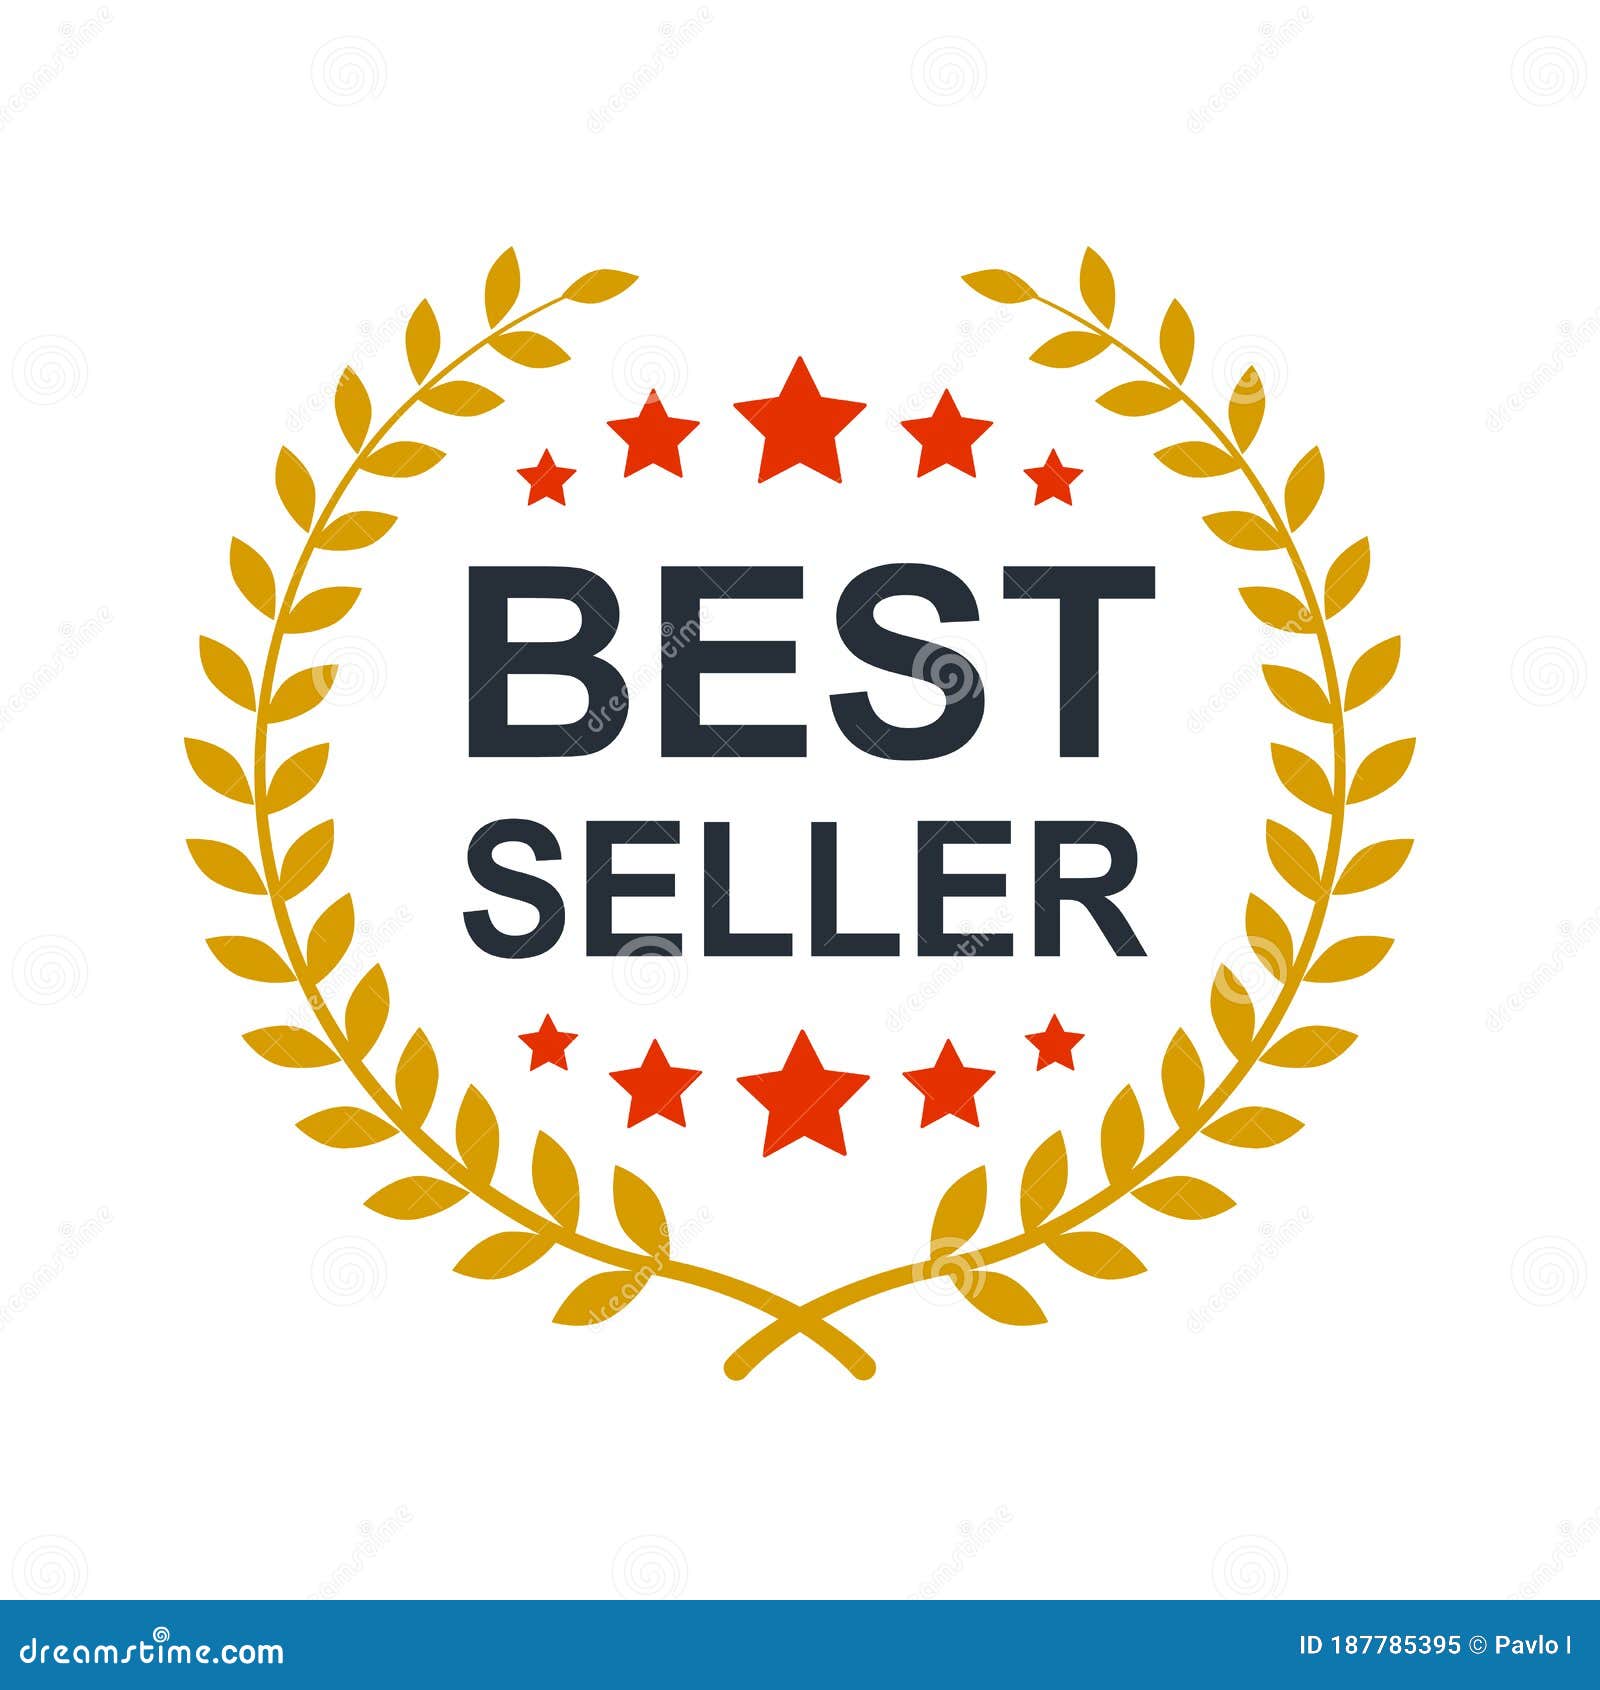 Red best seller icon or sign Royalty Free Vector Image